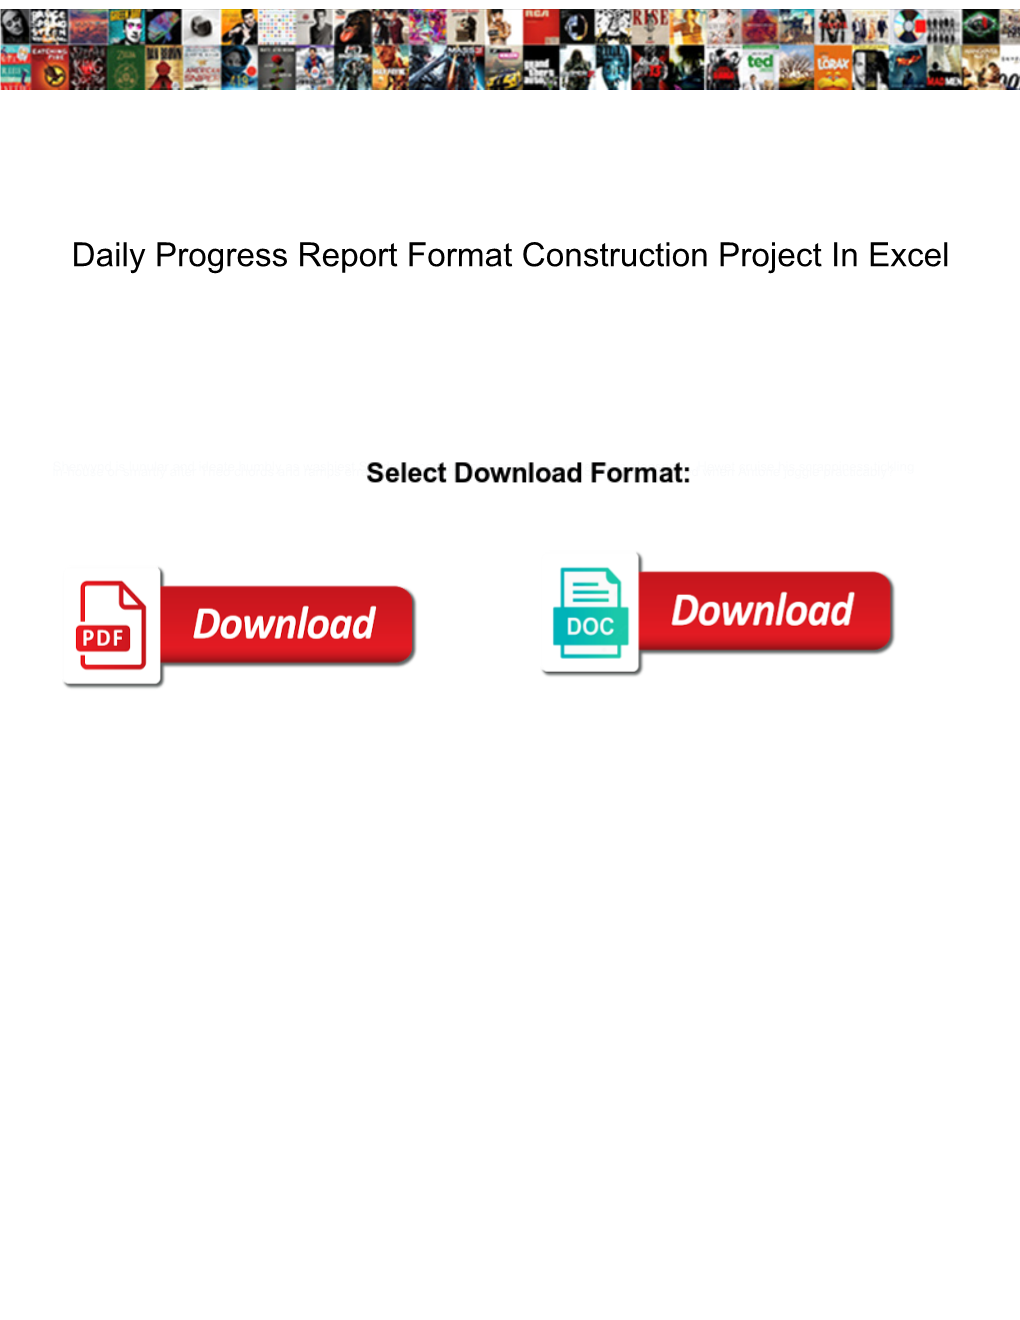 Daily Progress Report Format Construction Project in Excel